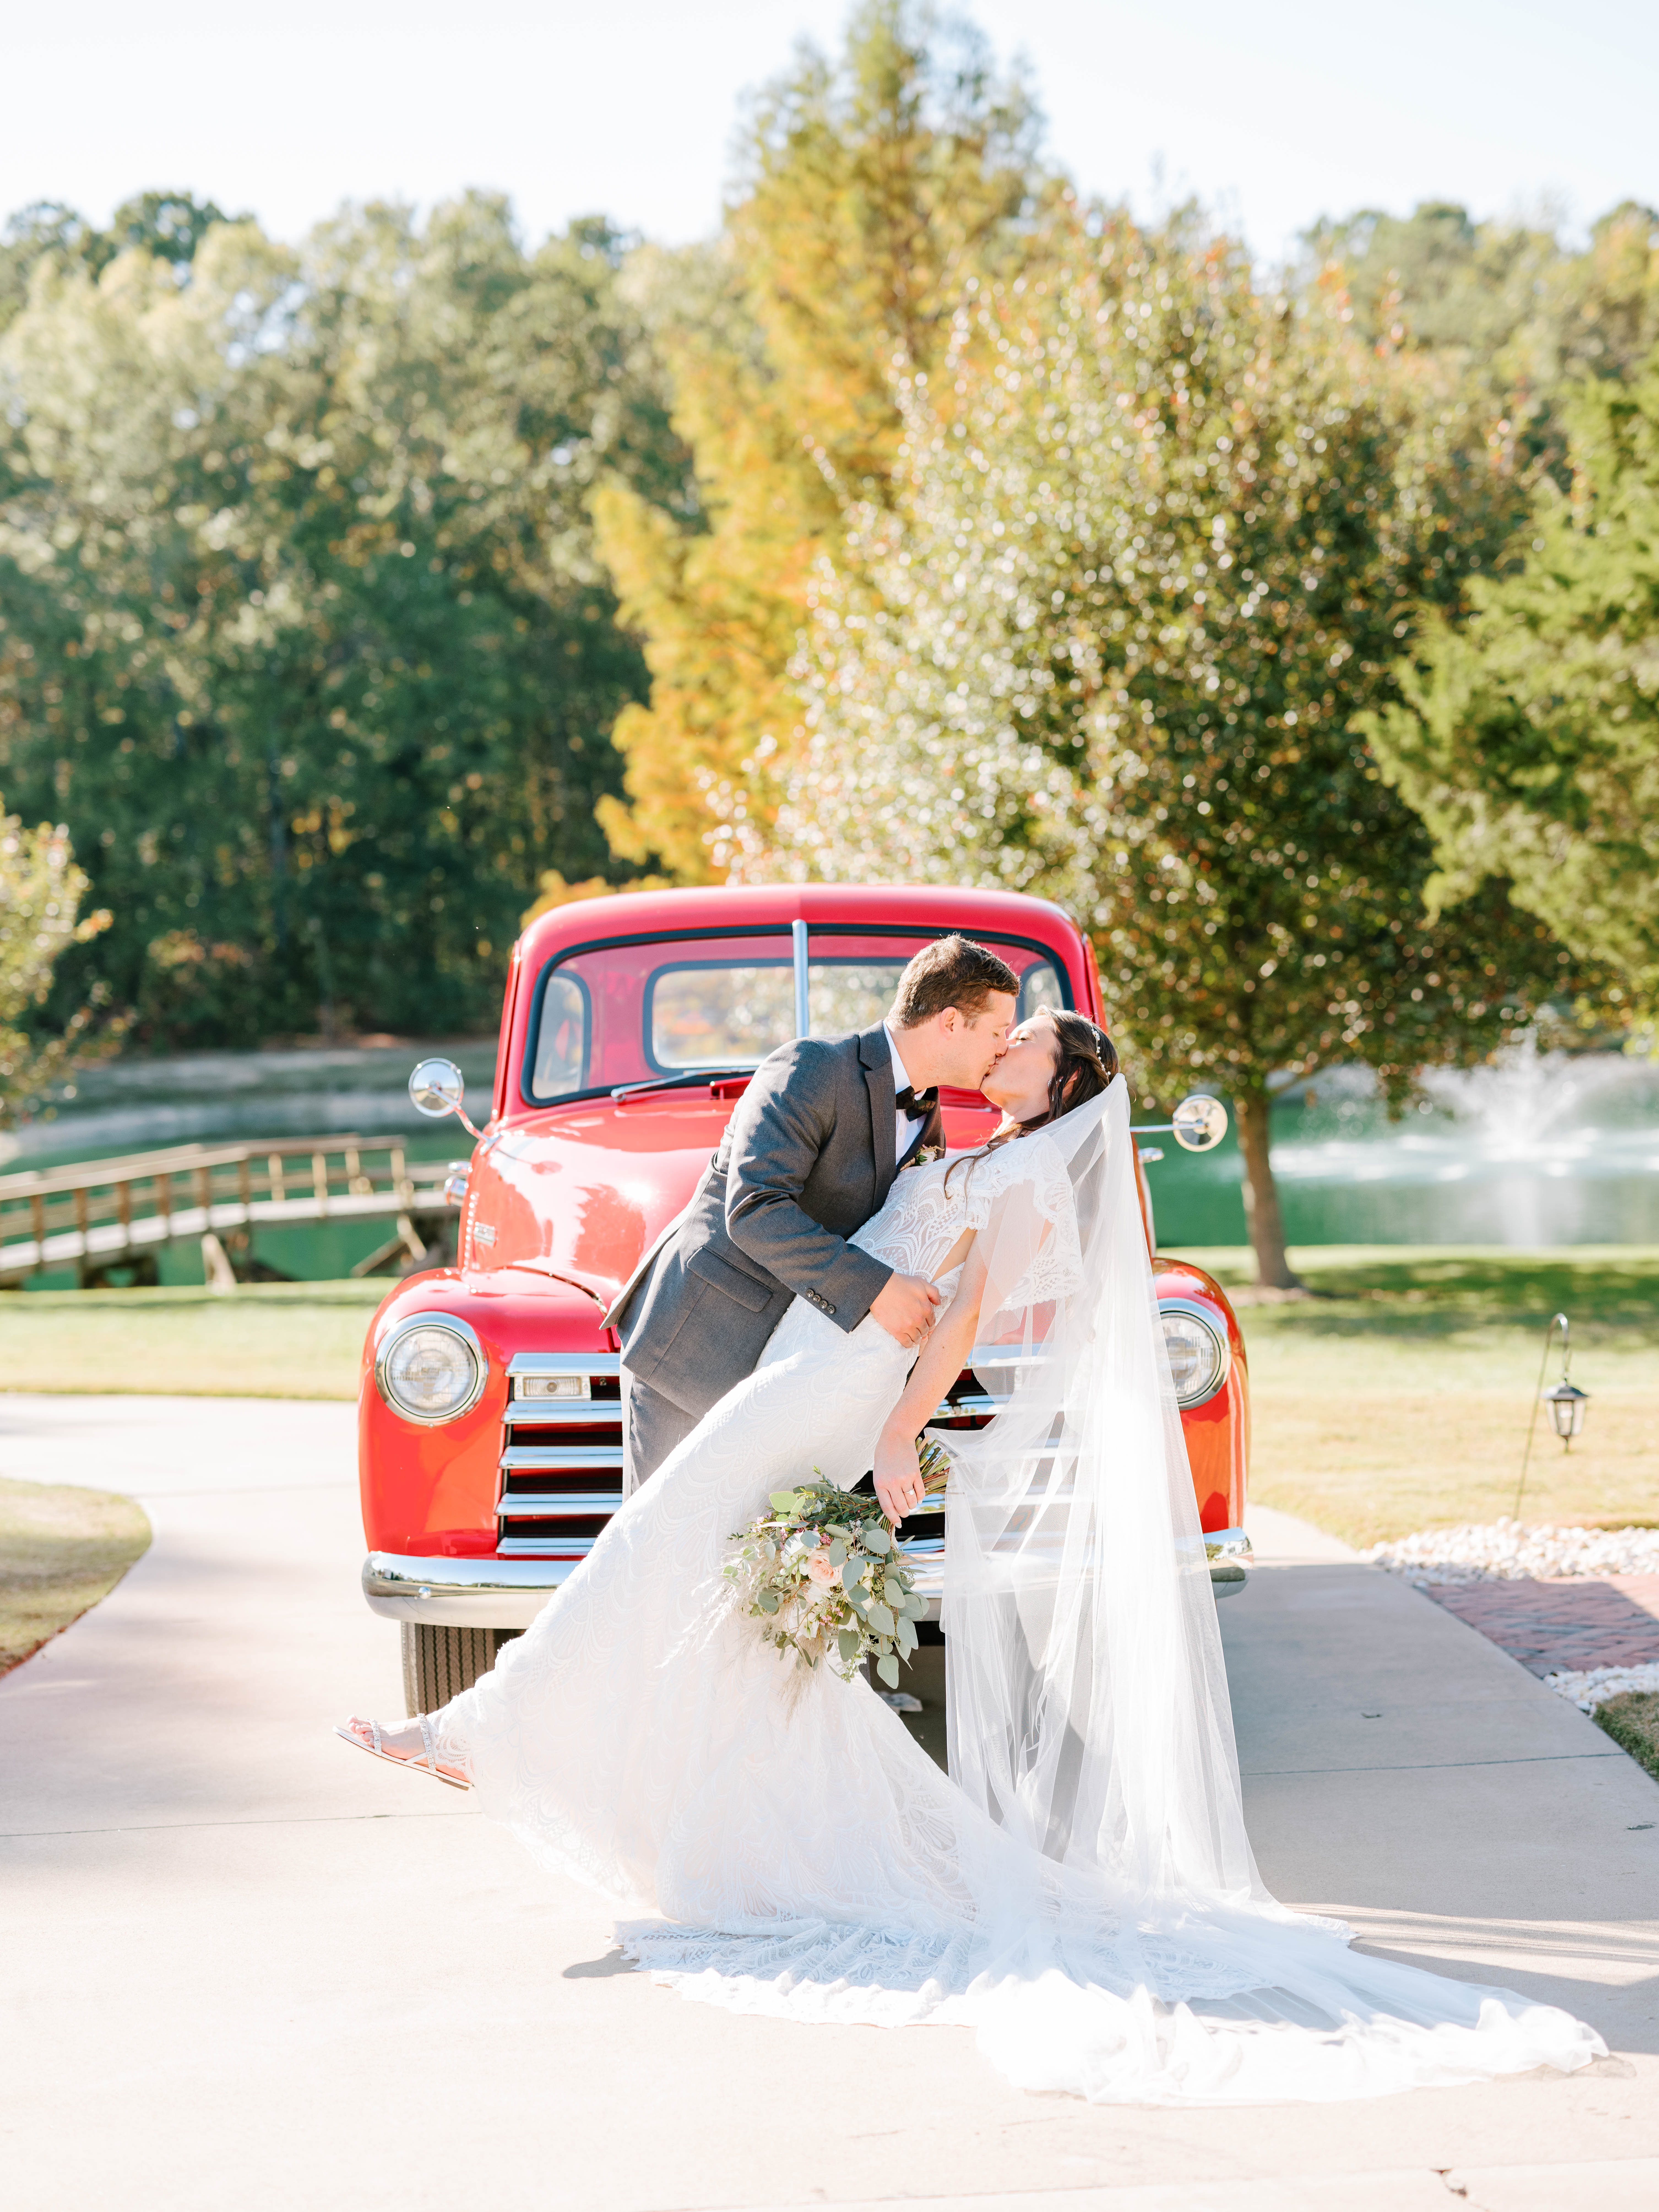 BRIDE AND GROOM IN FRONT OF VINTAGE RED CHEVY TRUCK